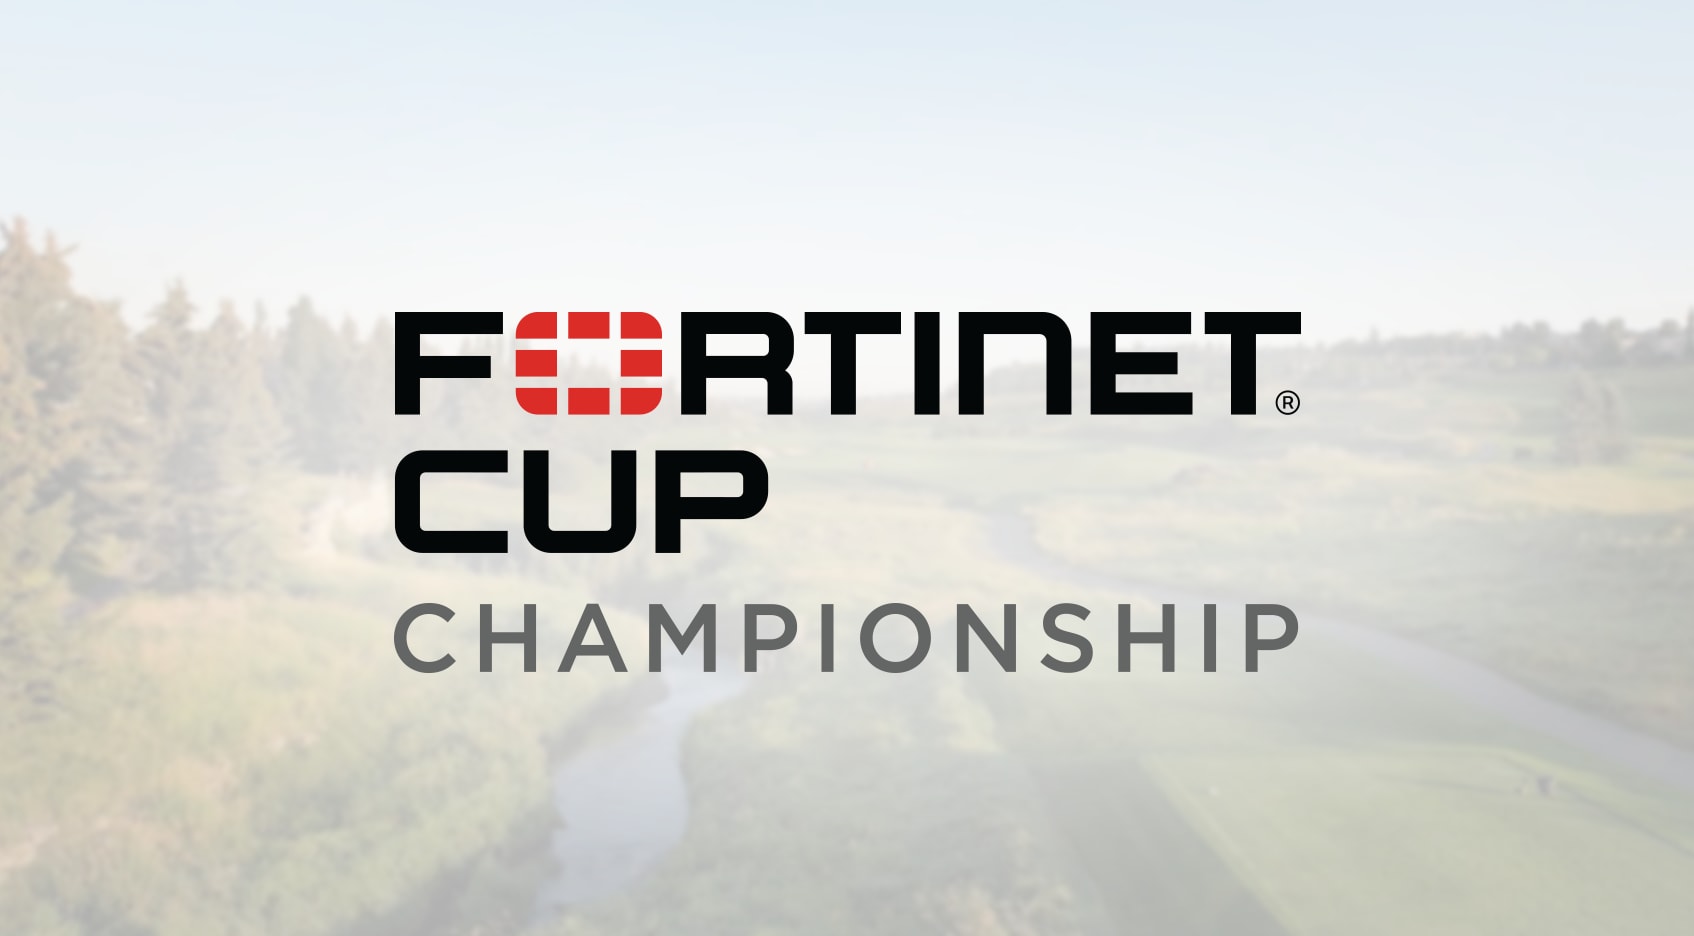 Cup Championship announces official charity partner for PGA